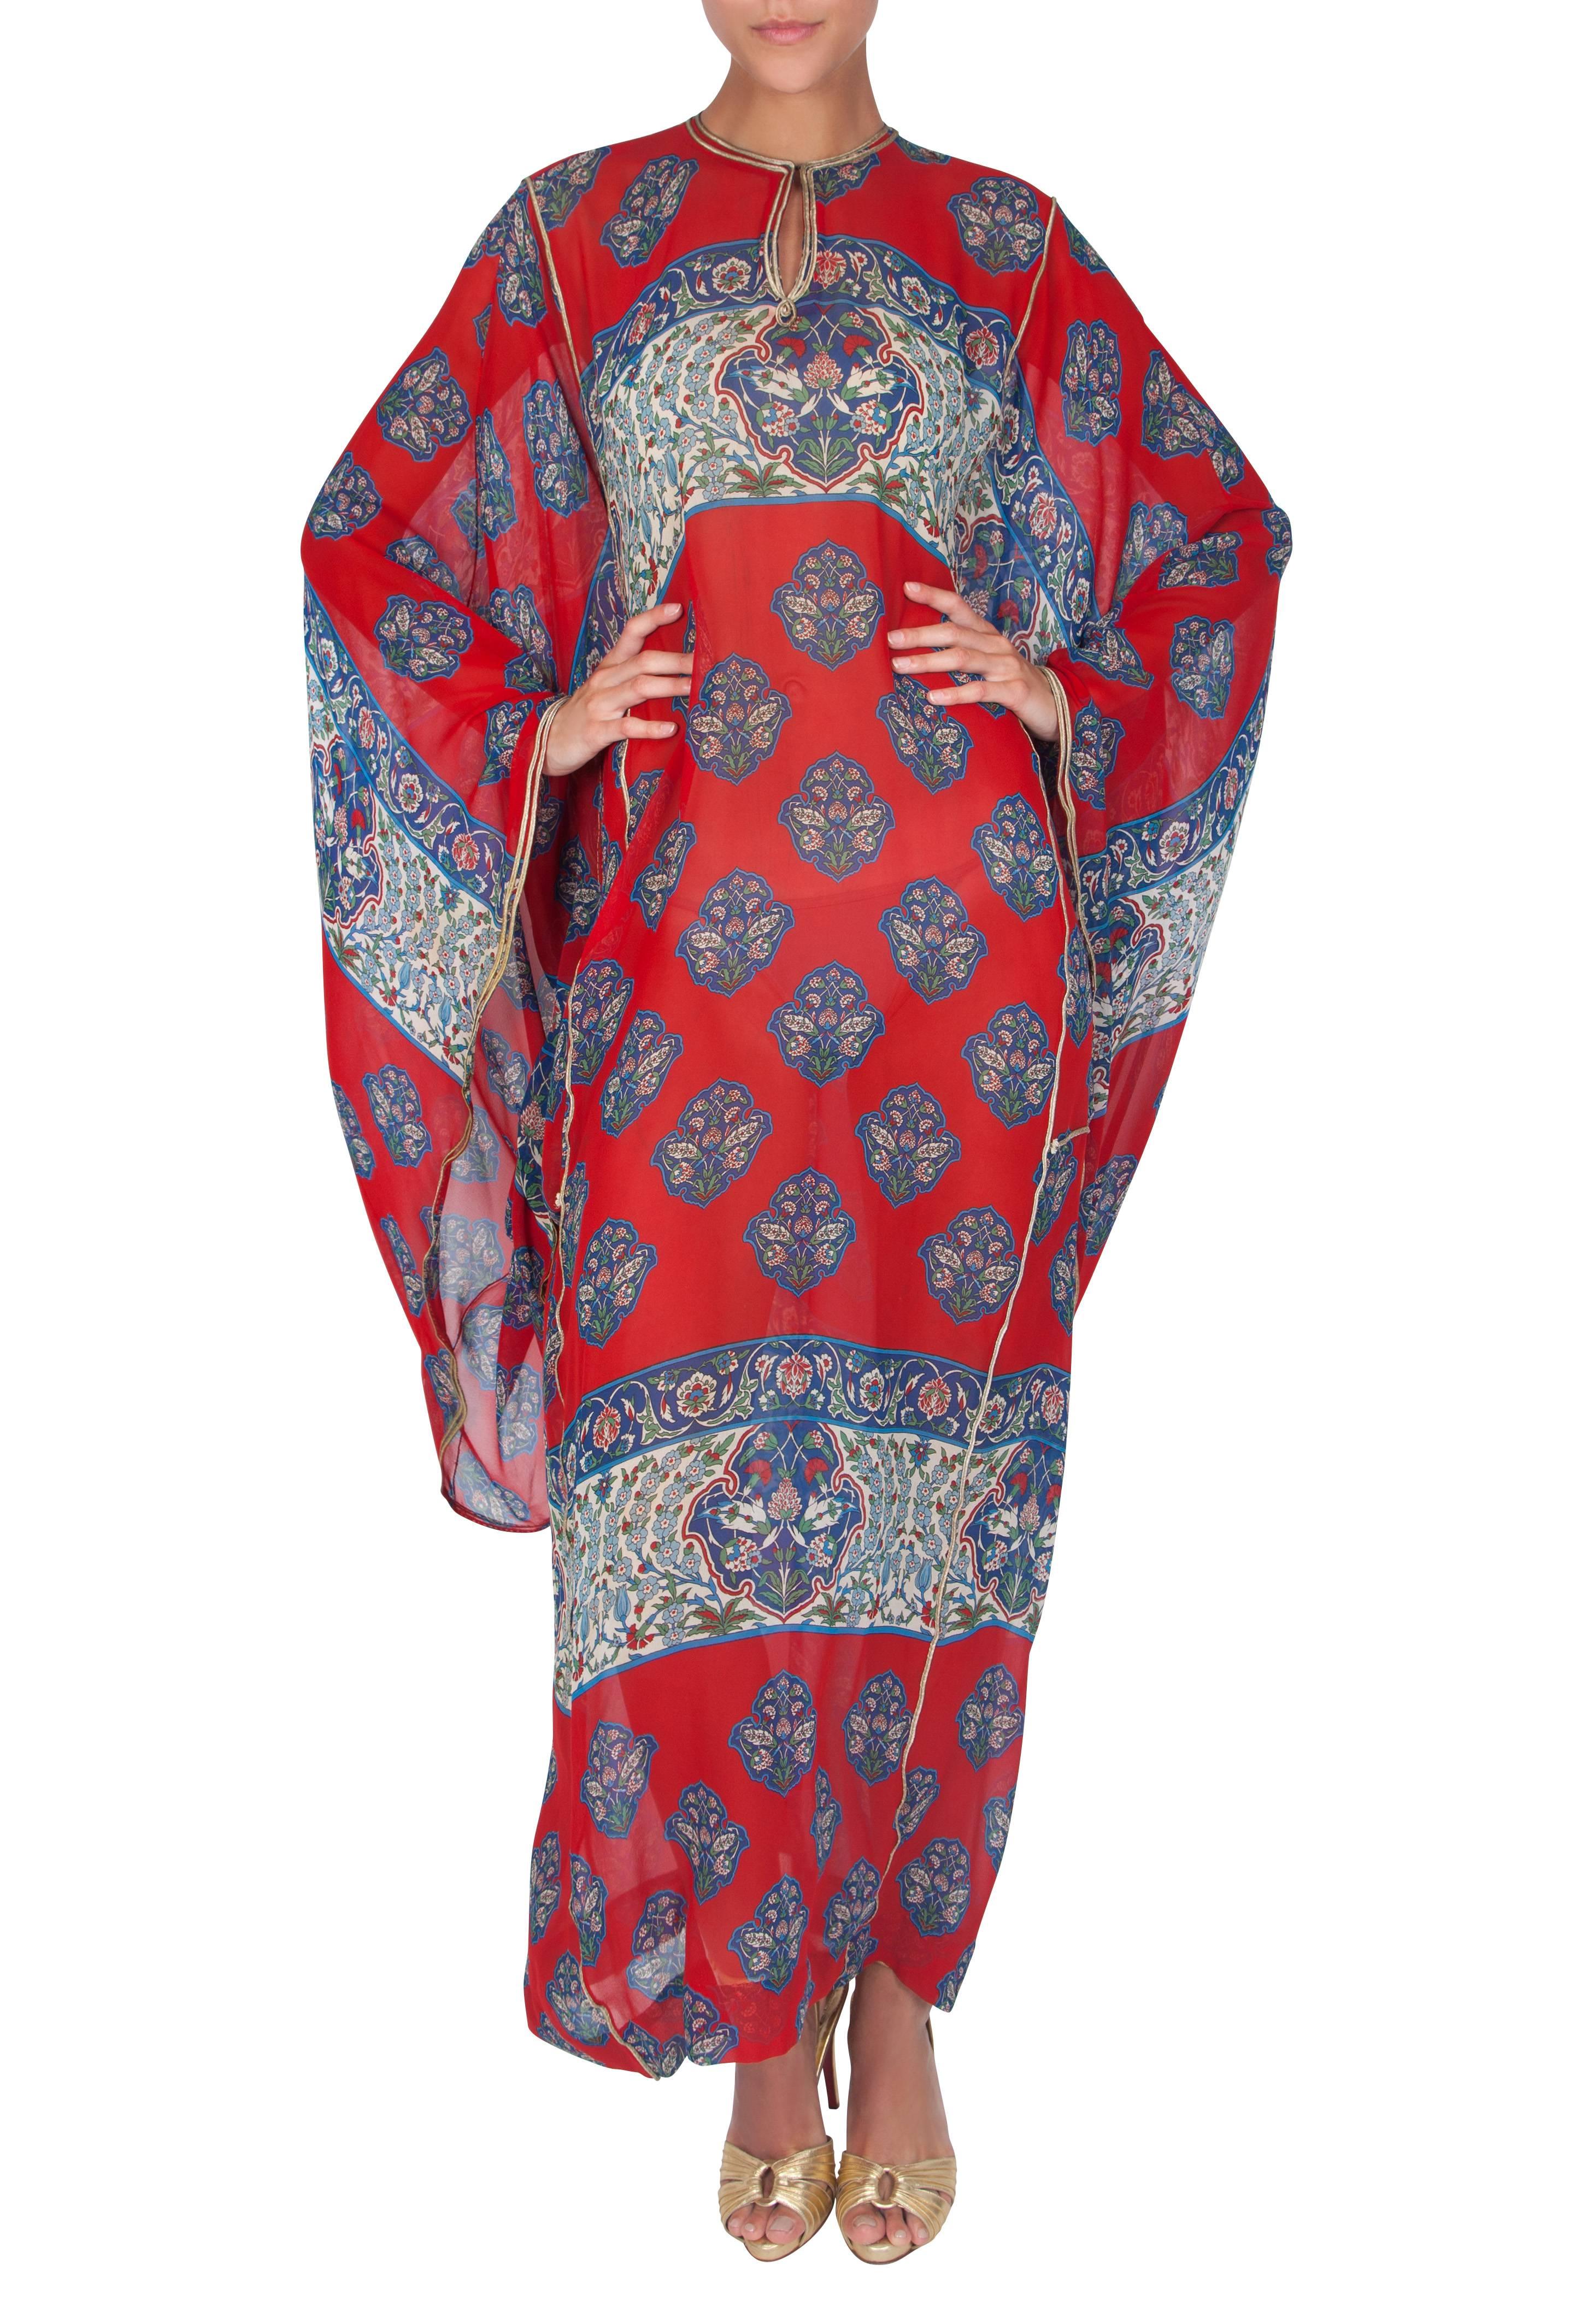 A rare red silk chiffon caftan with a blue and white floral pattern by London boutique Arabesque. The full-length flowing caftan features a metallic gold braid trim and full-length billowing batwing sleeves. An adjustable slit neckline can either be